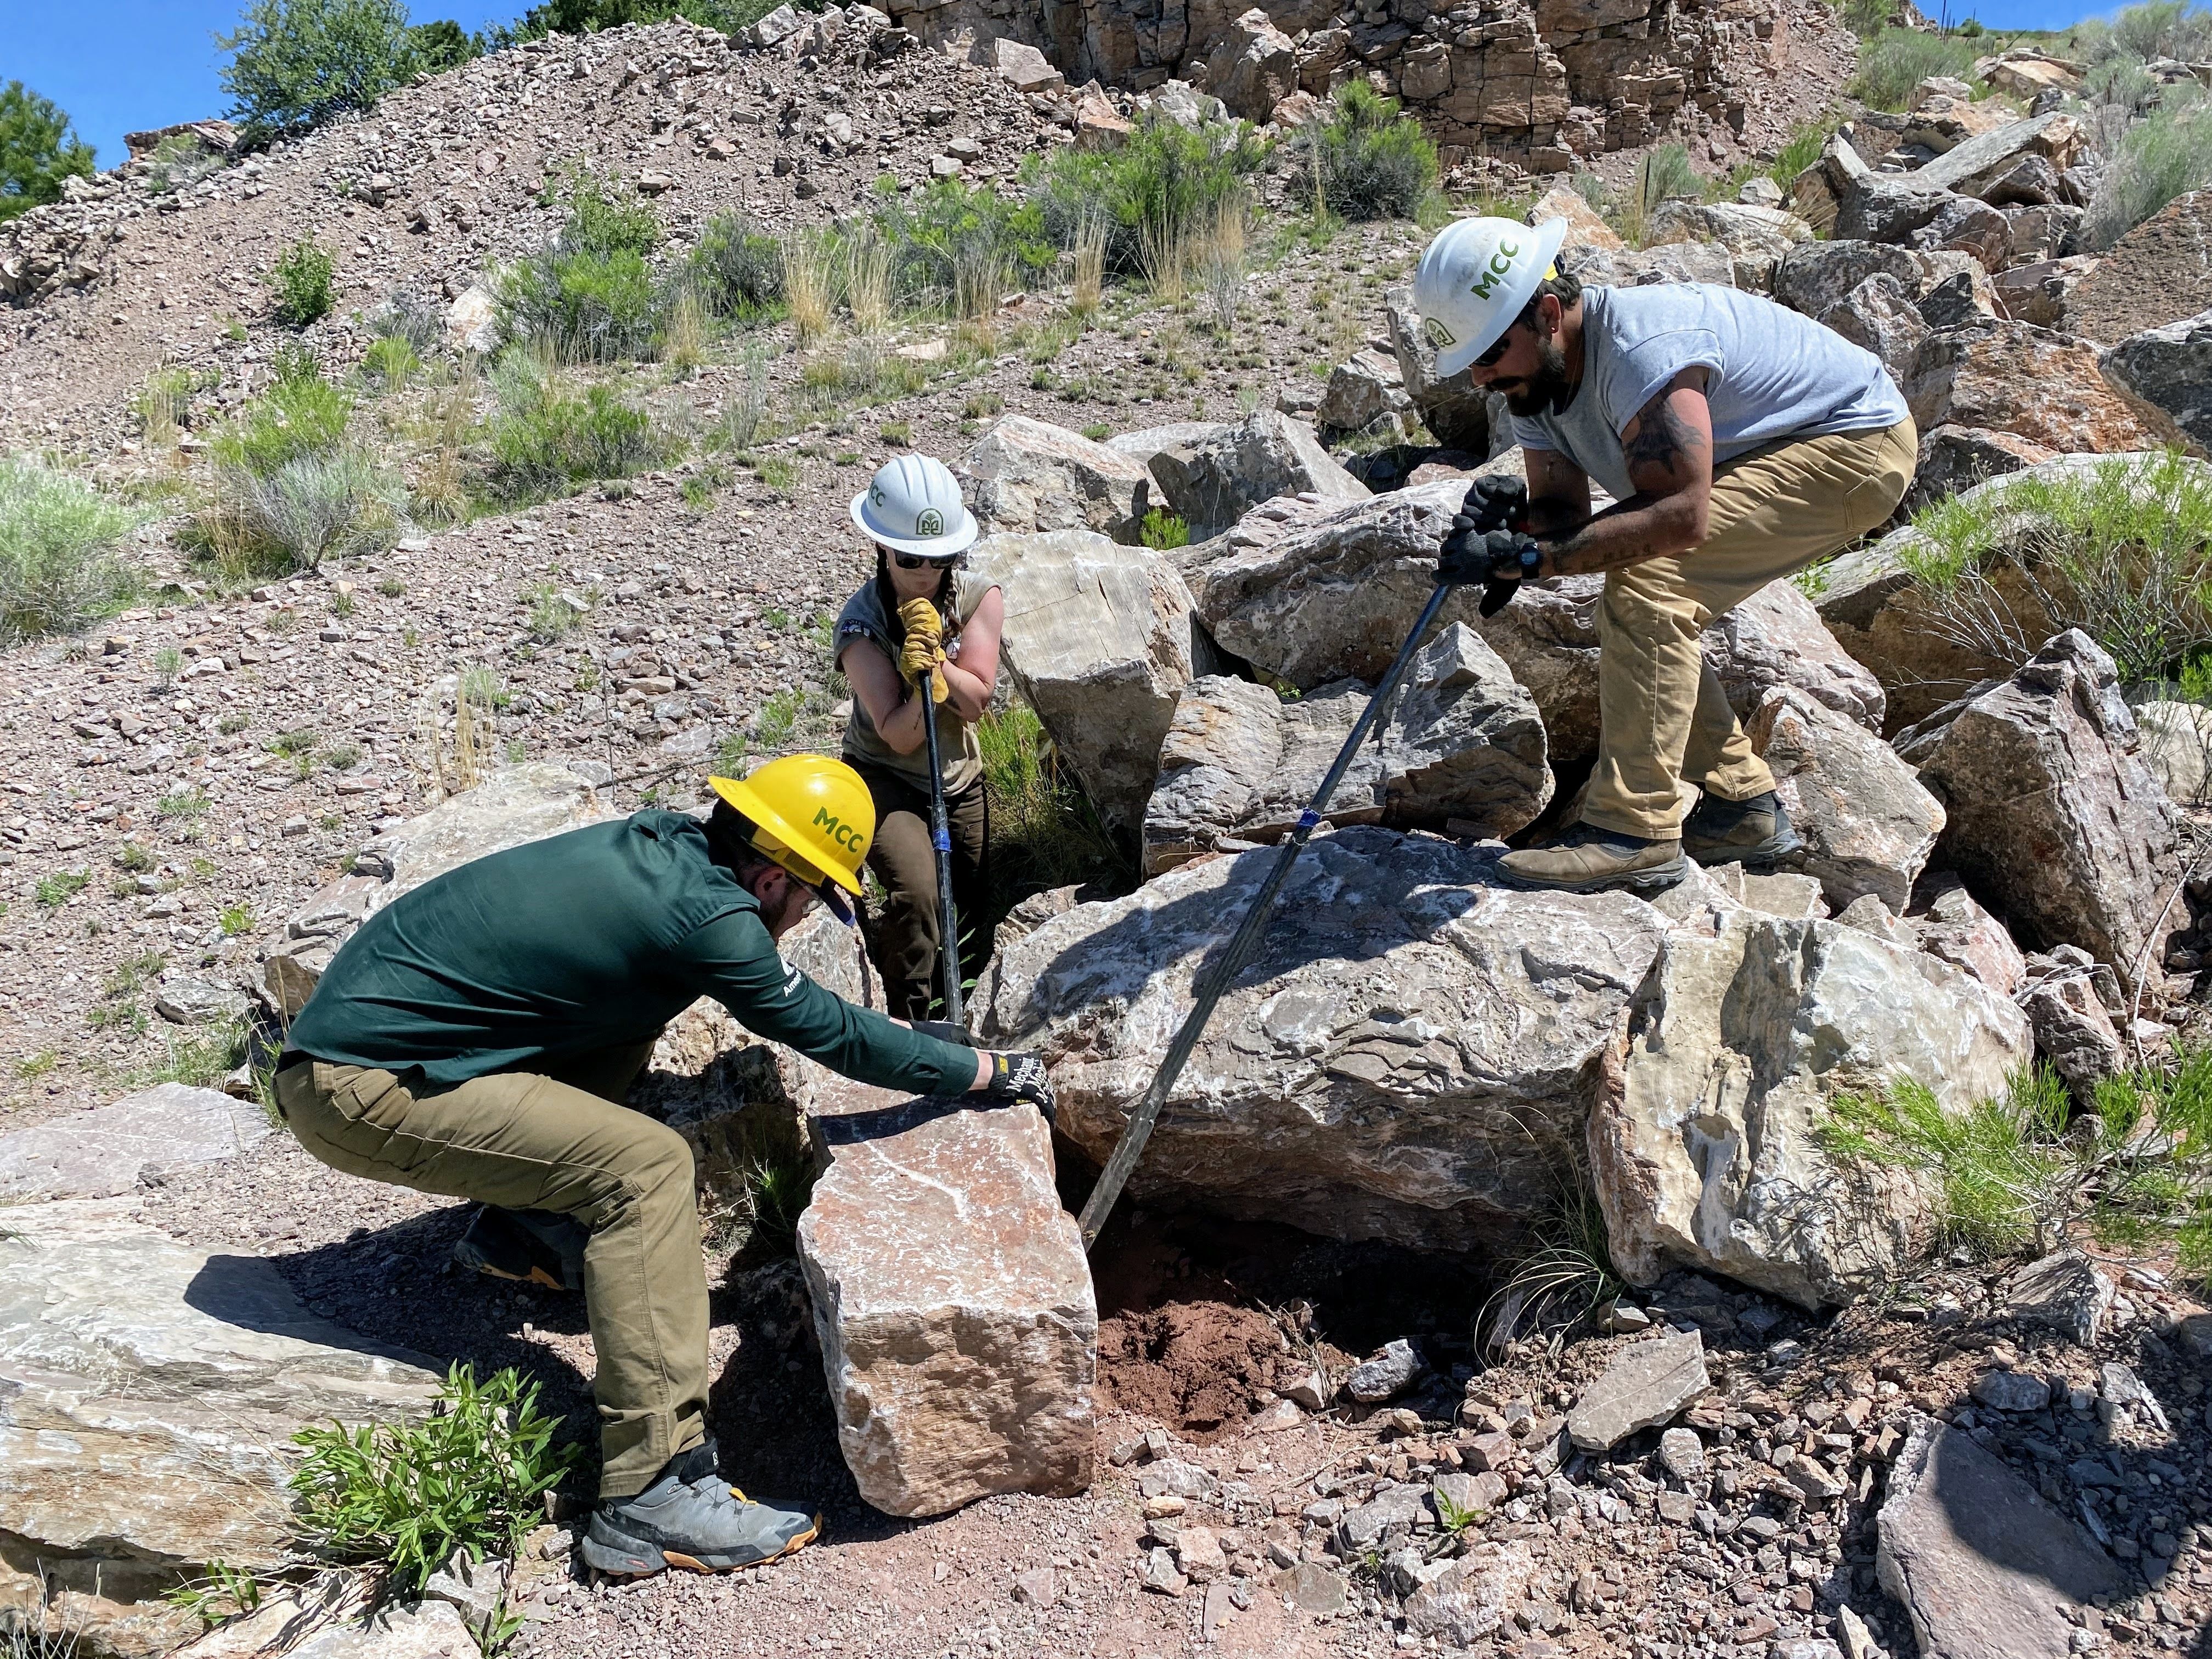 Three people are clustered around a rock, working to move it. Two people on the back and the side are using rock bars to leverage against it, and the third person is using their gloved hands to pull it away.